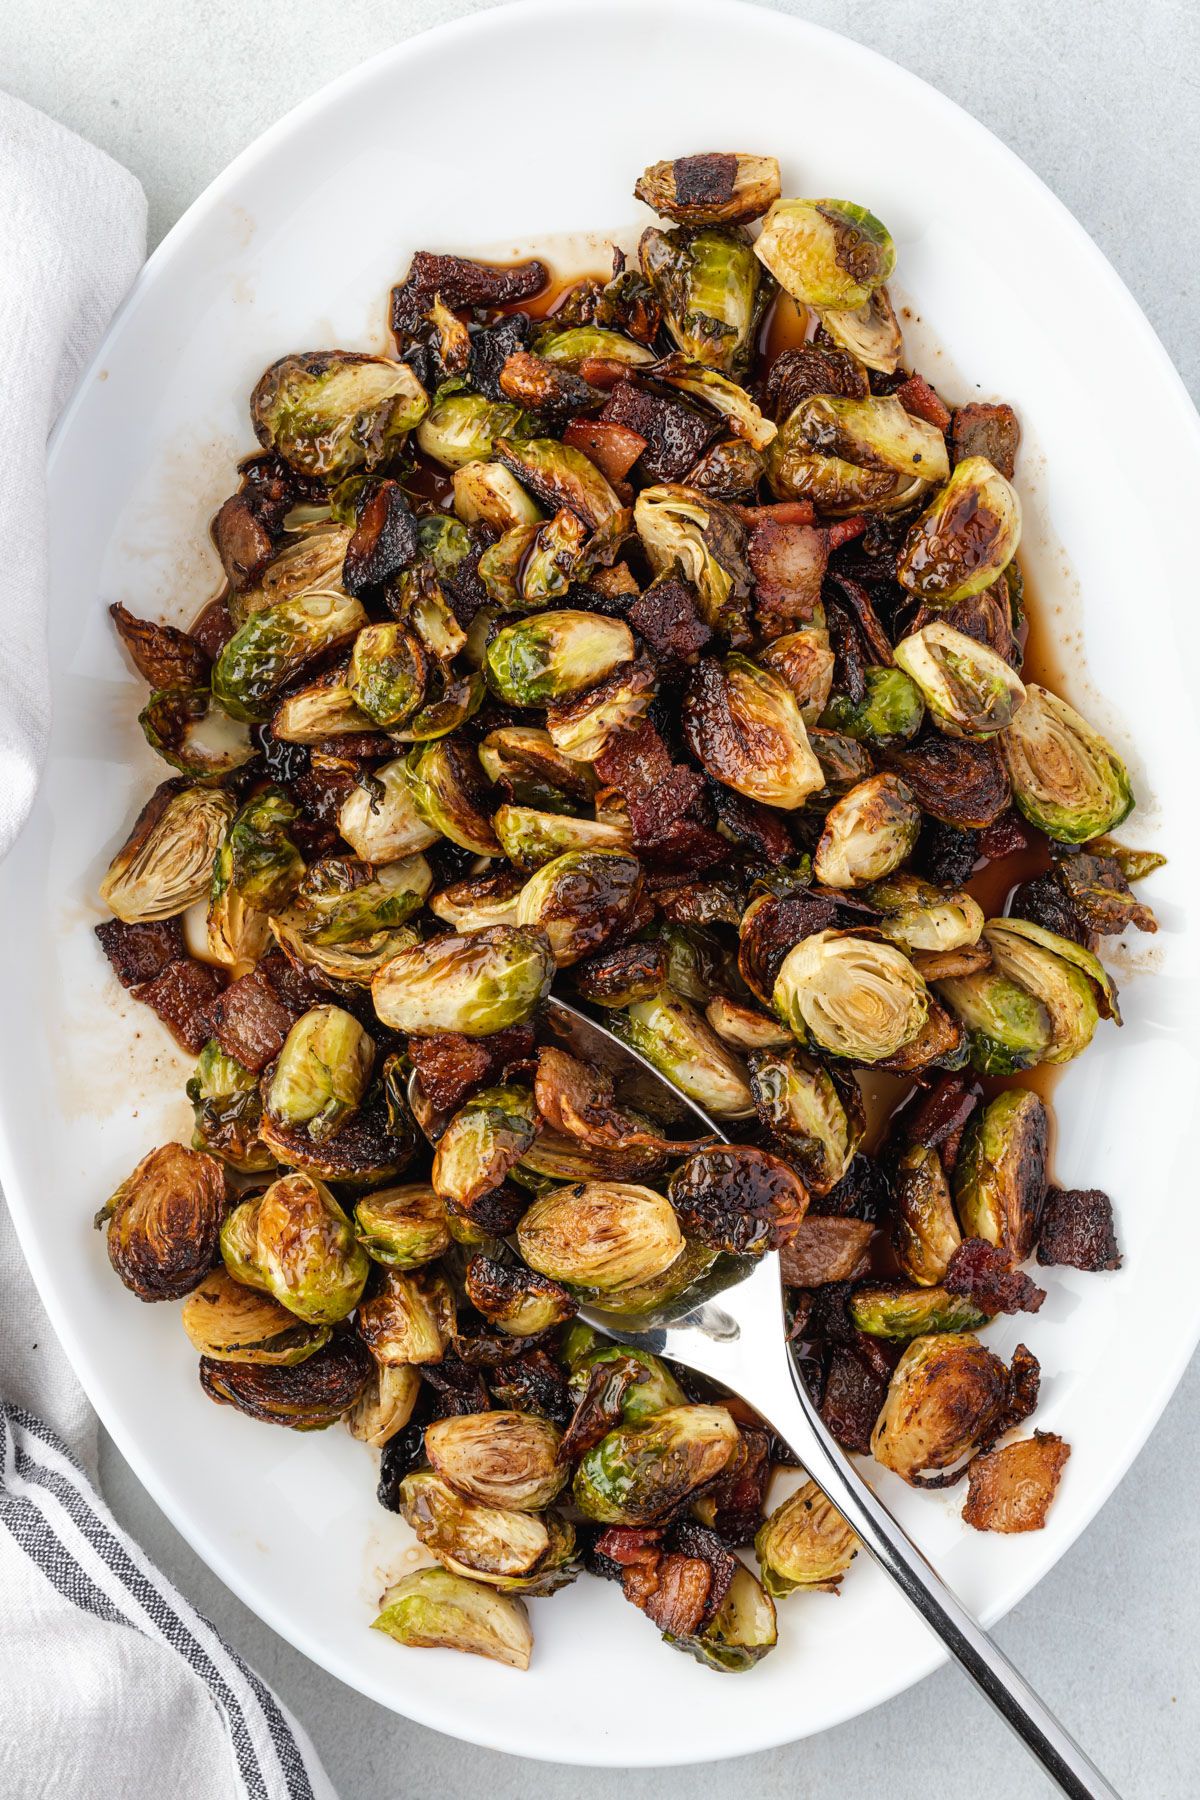 Overhead of the brussels sprouts tossed in maple balsamic sauce and on a platter.